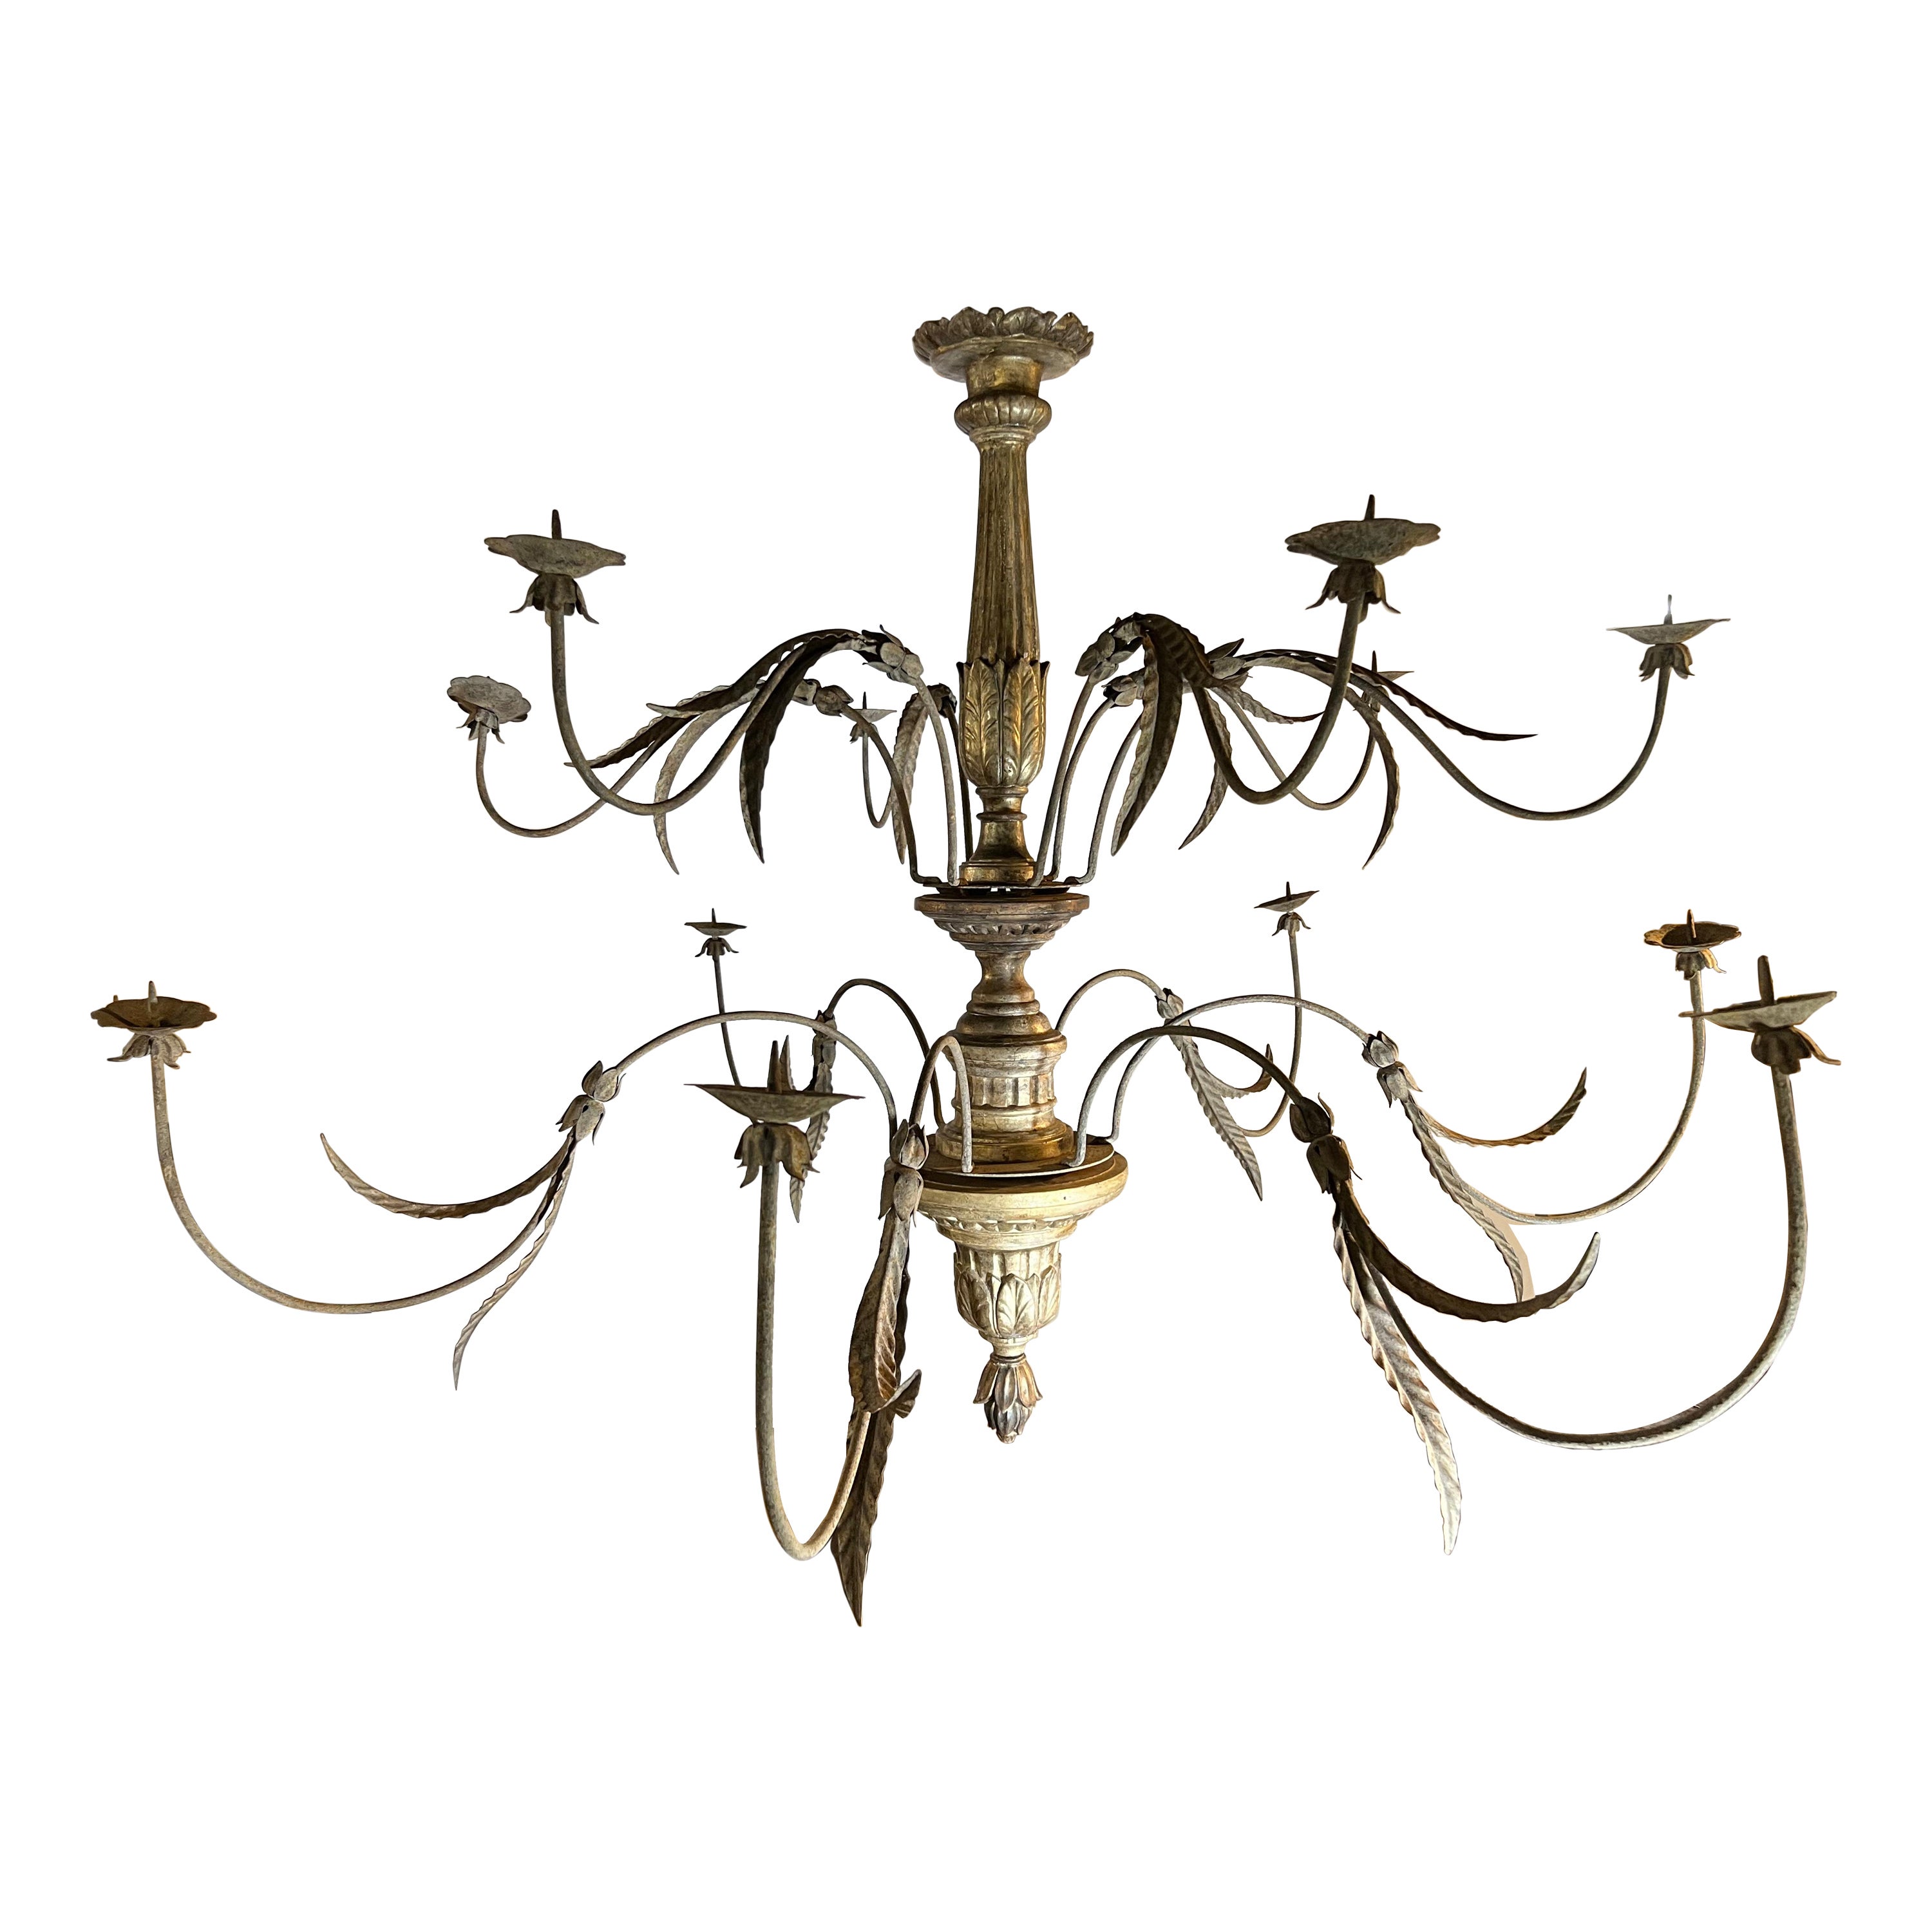 Exceptional Mid-18th Century 2-Tiered Italian Chandelier For Sale